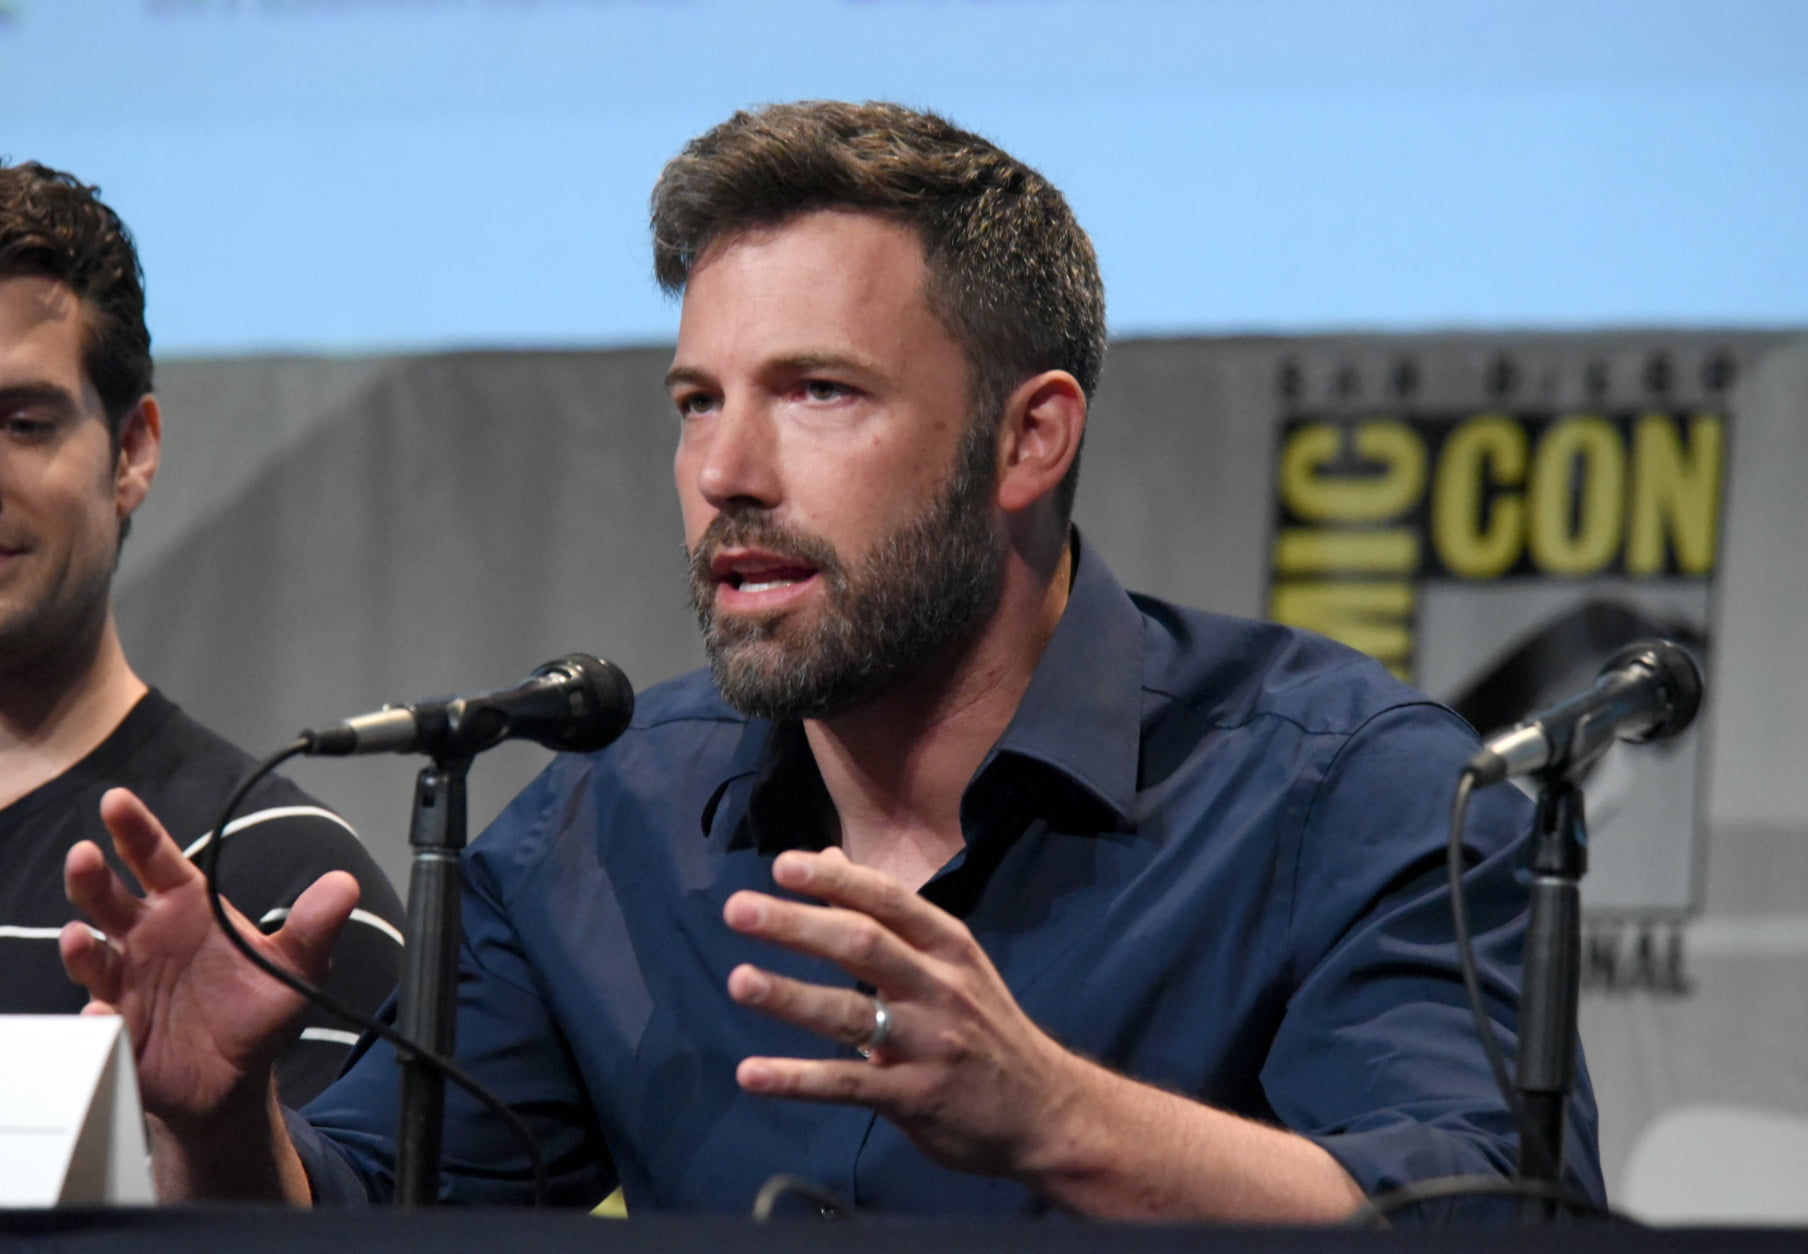 Ben Affleck attends the "Batman v Superman: Dawn of Justice" panel on Day 3 of Comic-Con International, on Saturday, July 11, 2015, in San Diego. (Photo by Richard Shotwell/Invision/AP)